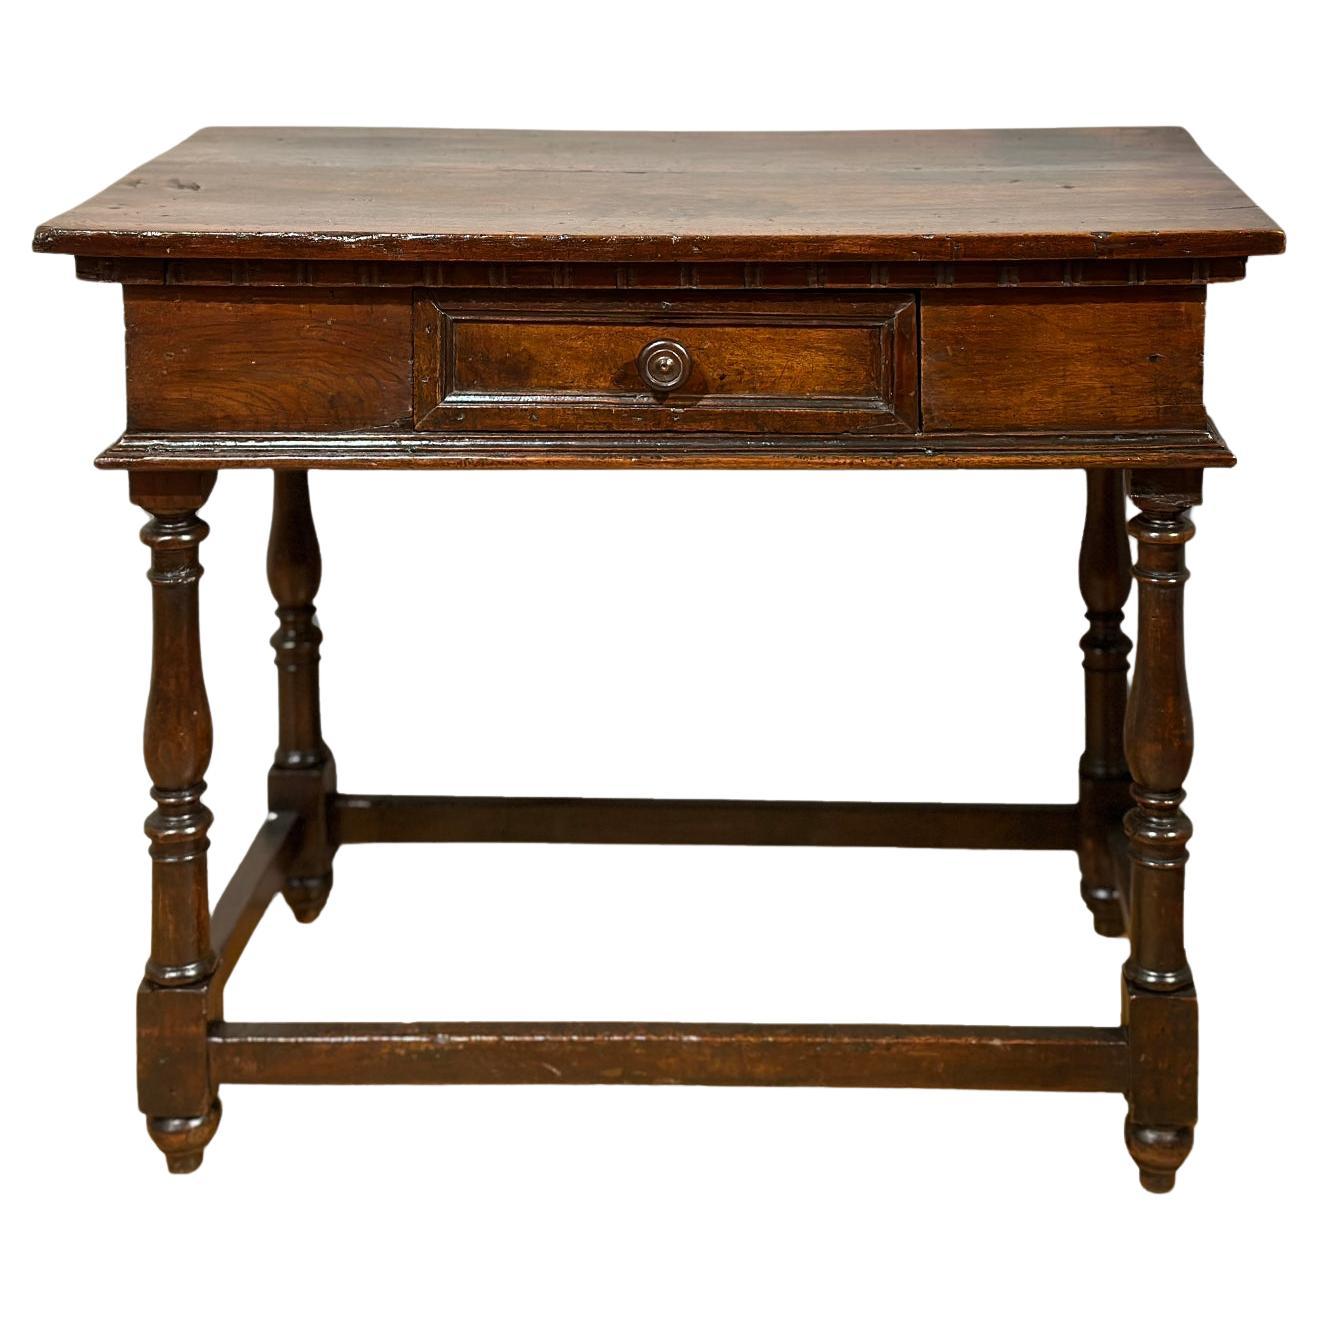 END OF THE 16th CENTURY LOUIS XIV TABLE WITH DRAWER For Sale